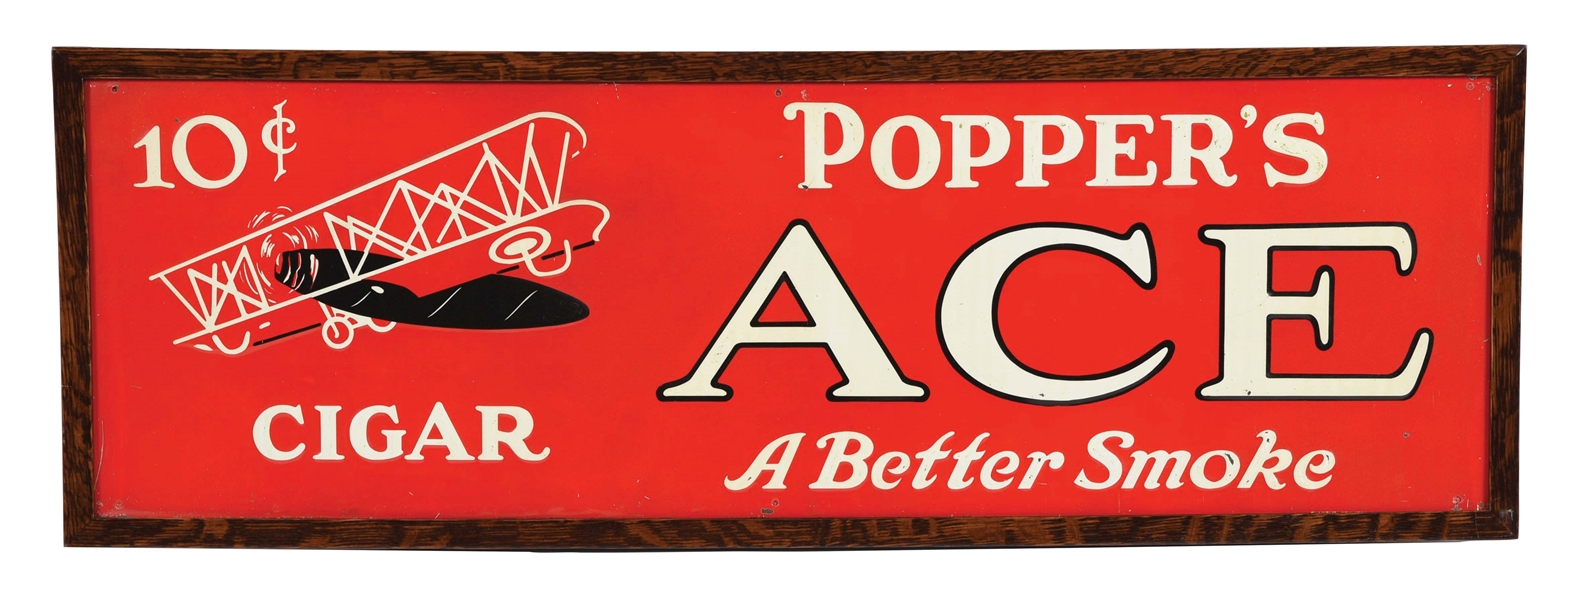 EMBOSSED TIN SIGN FOR POPPERS ACE CIGARS.